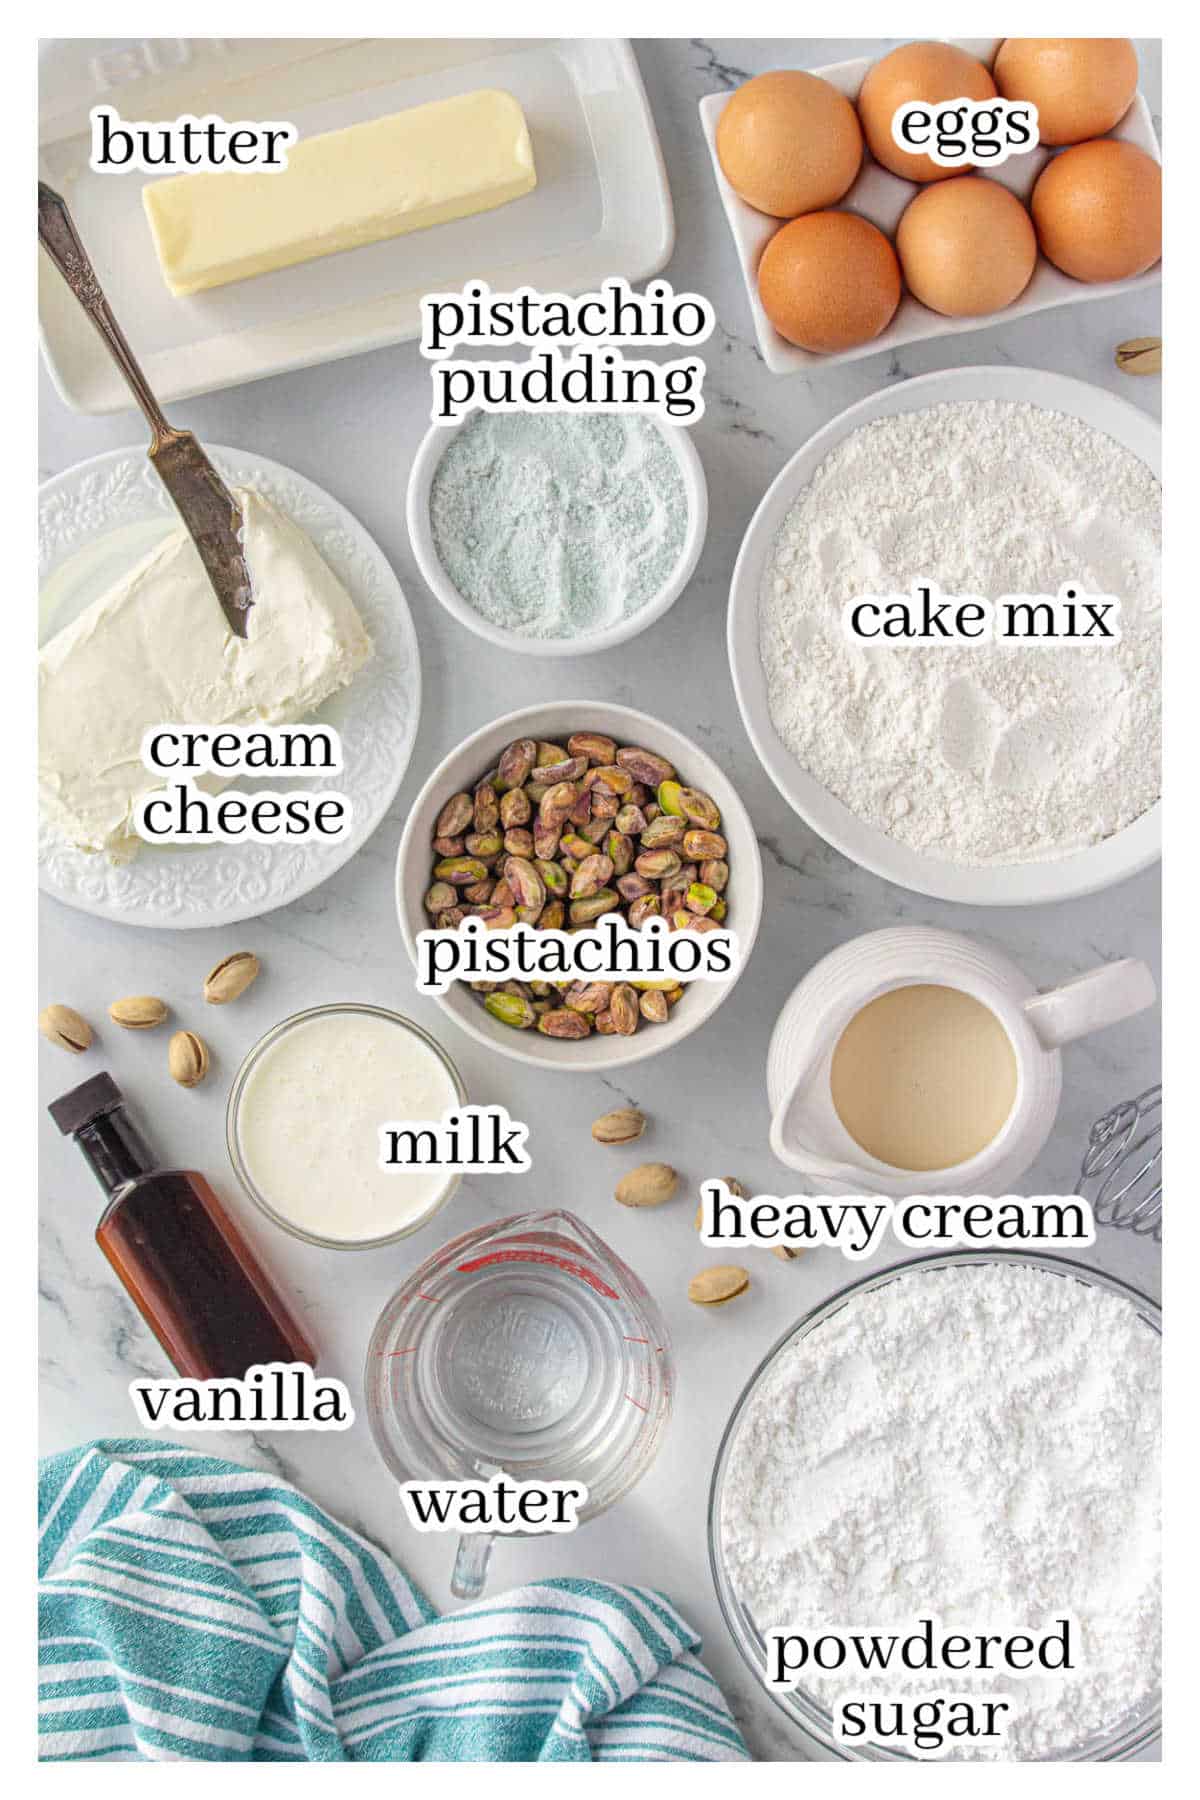 All of the ingredients needed to make the cake recipe, with print overlay for clarification.